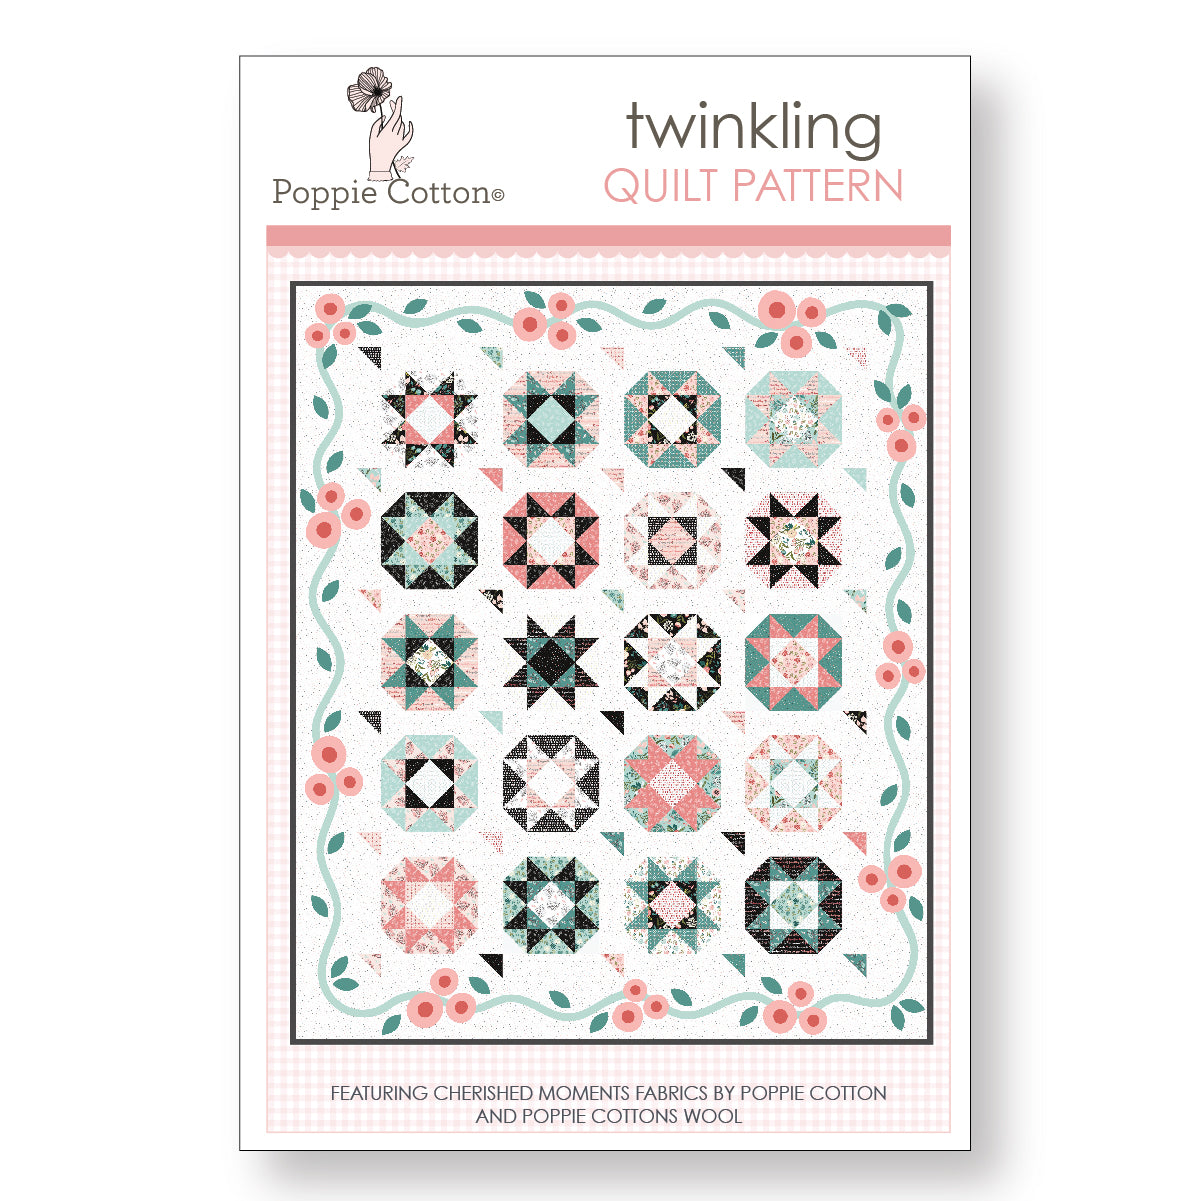 Twinkling Quilt Pattern by Poppie Cotton Fabrics